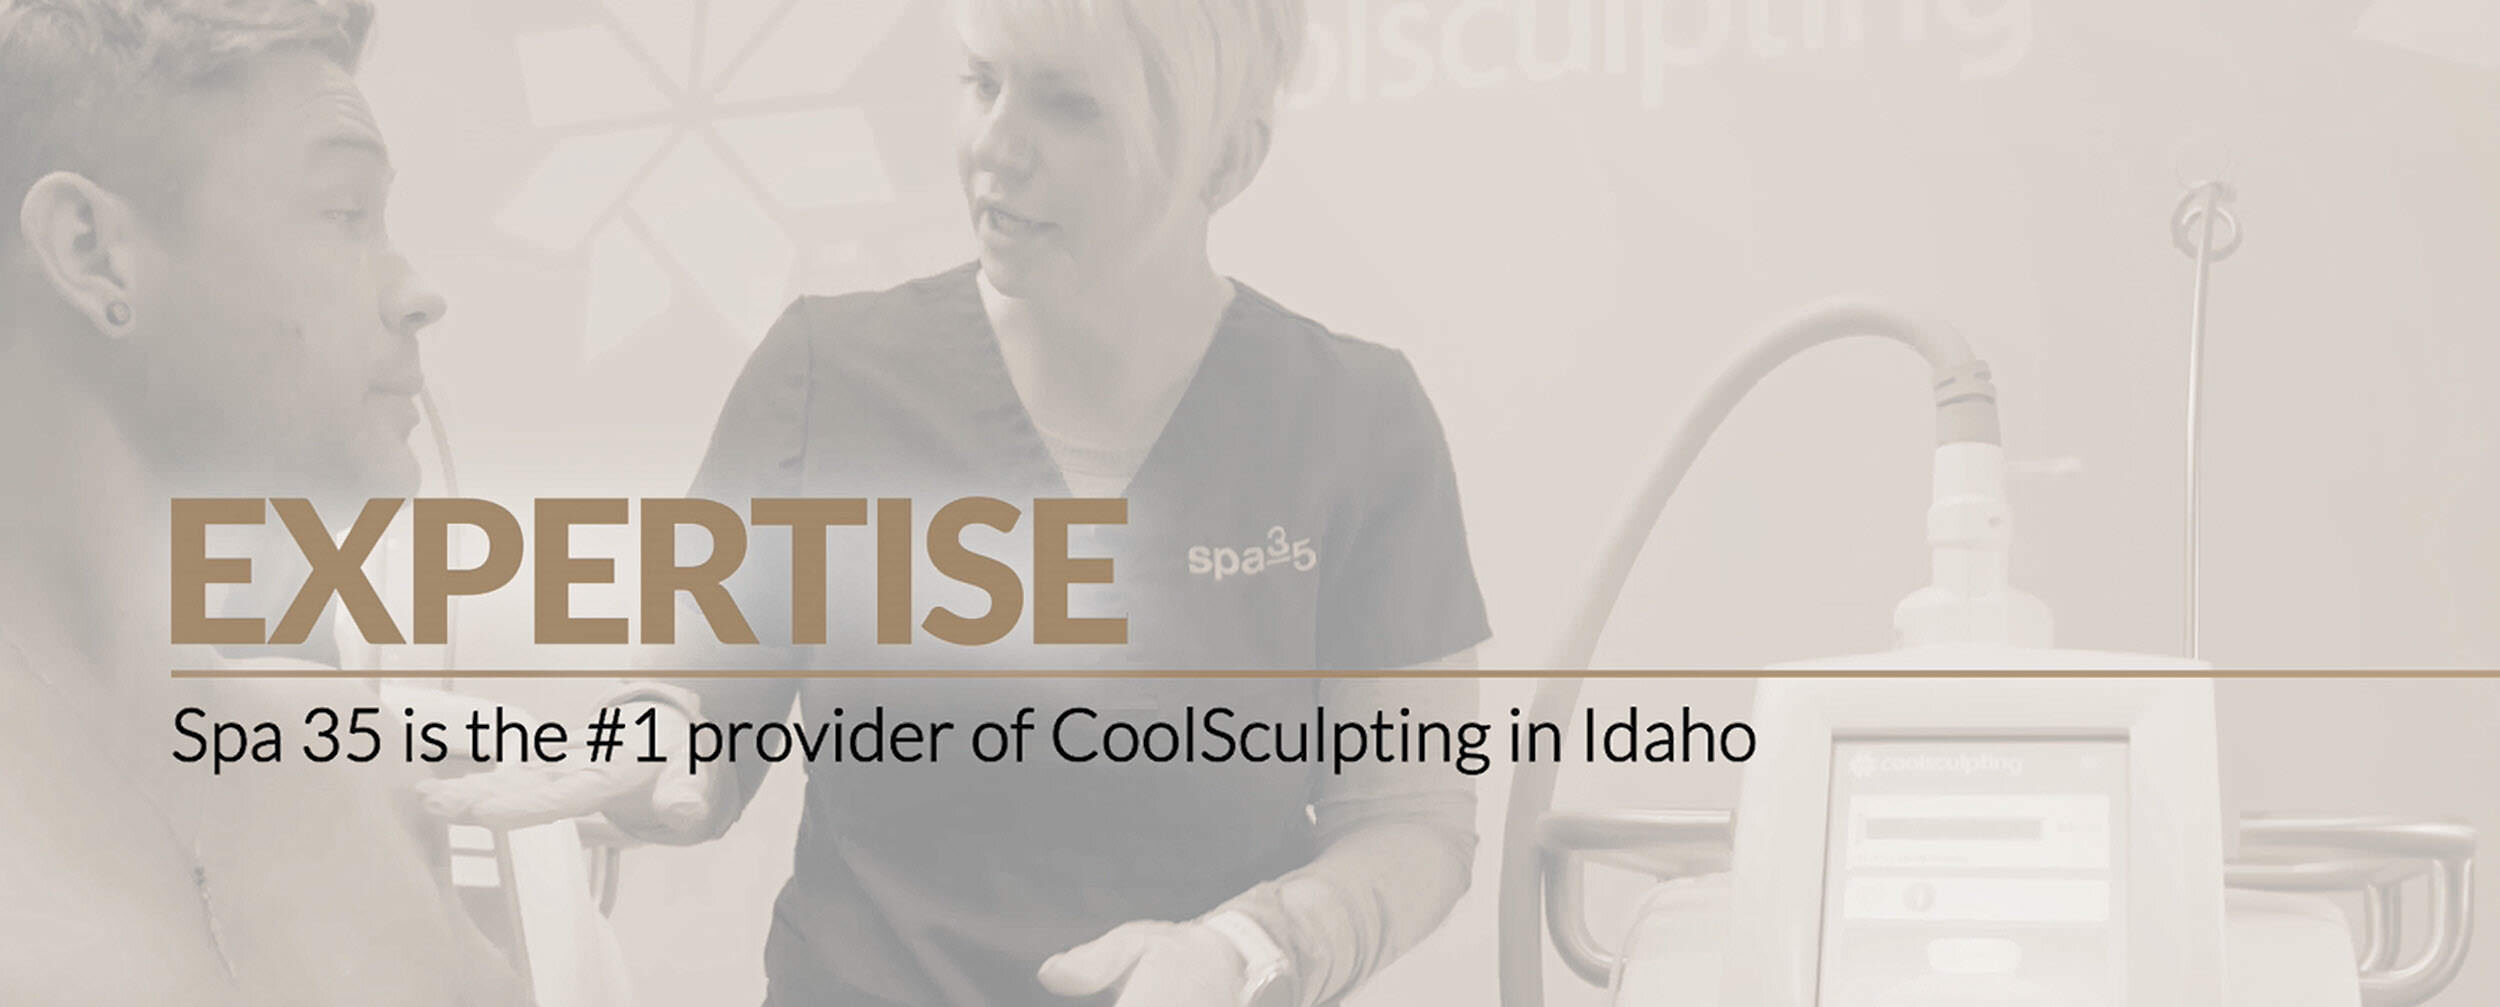 Master Certified in CoolSculpting, Consultants to Candela Medical - Worldwide leaders in cosmetic lasers (Copy) (Copy) (Copy) (Copy) (Copy) (Copy)